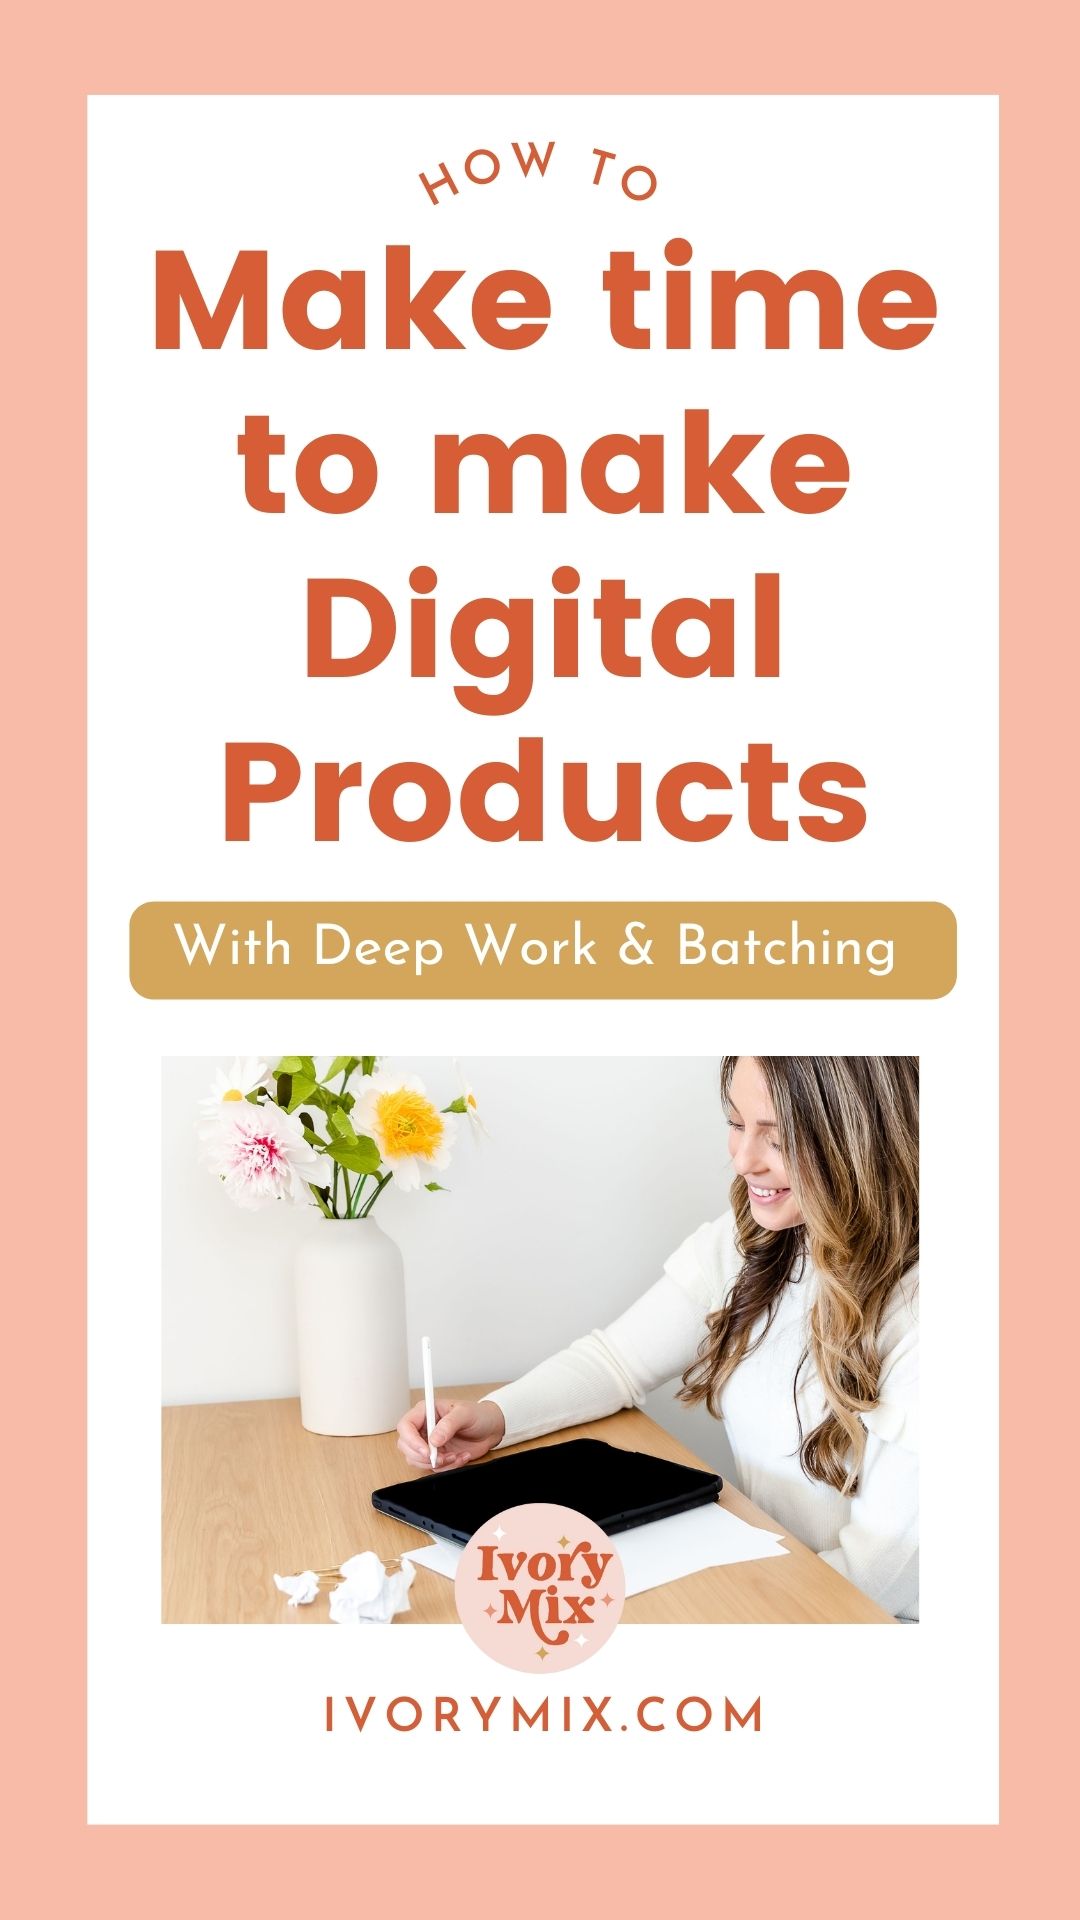 Make time to make Digital Products with deep work and batching in your small online business